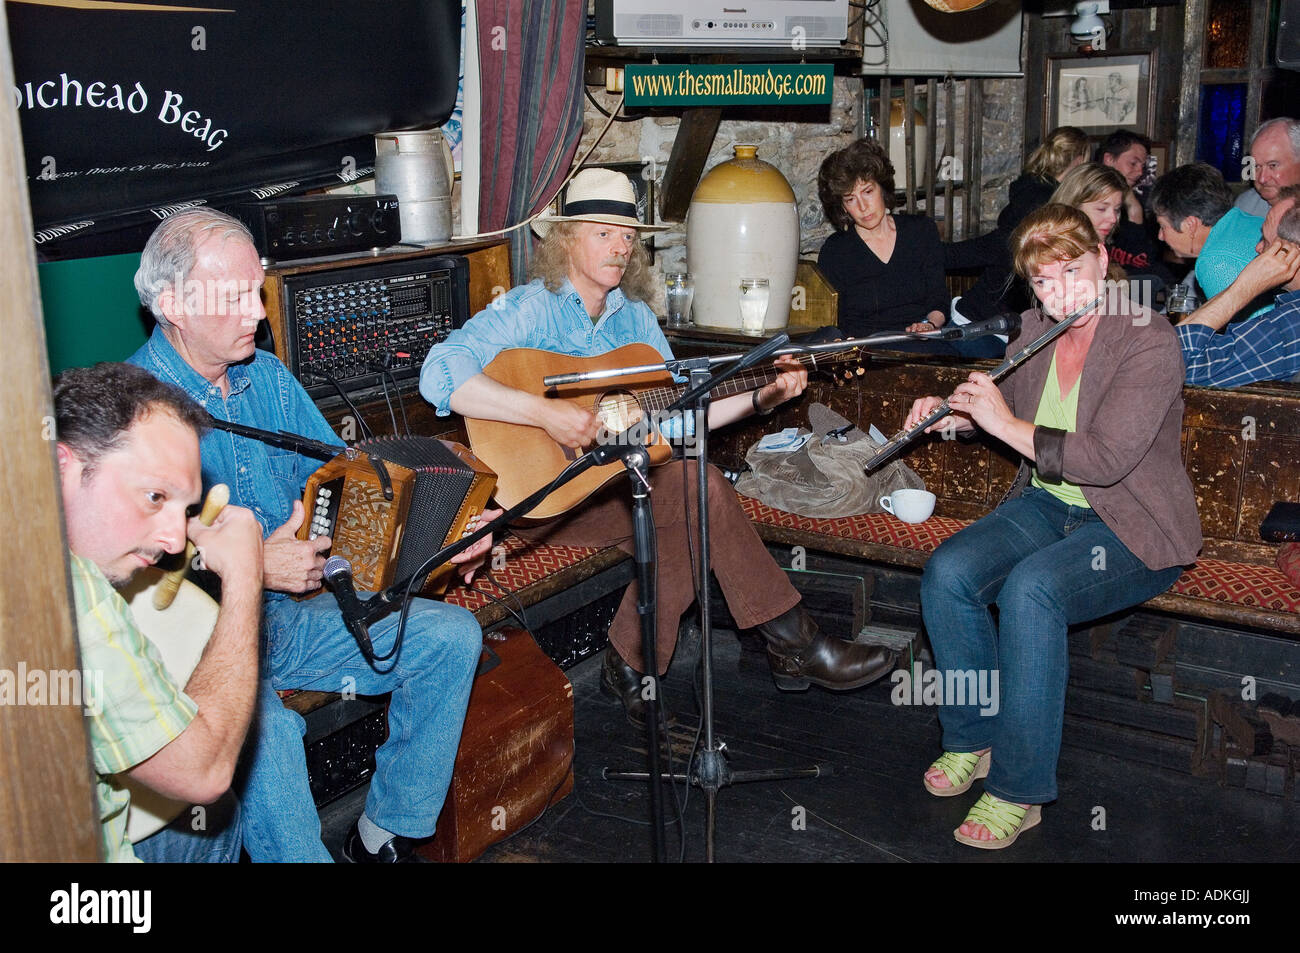 Traditional music in bar of the An Droicead Beag pub in Dingle, County Kerry. Town famous for pubs, music and relaxed atmosphere Stock Photo